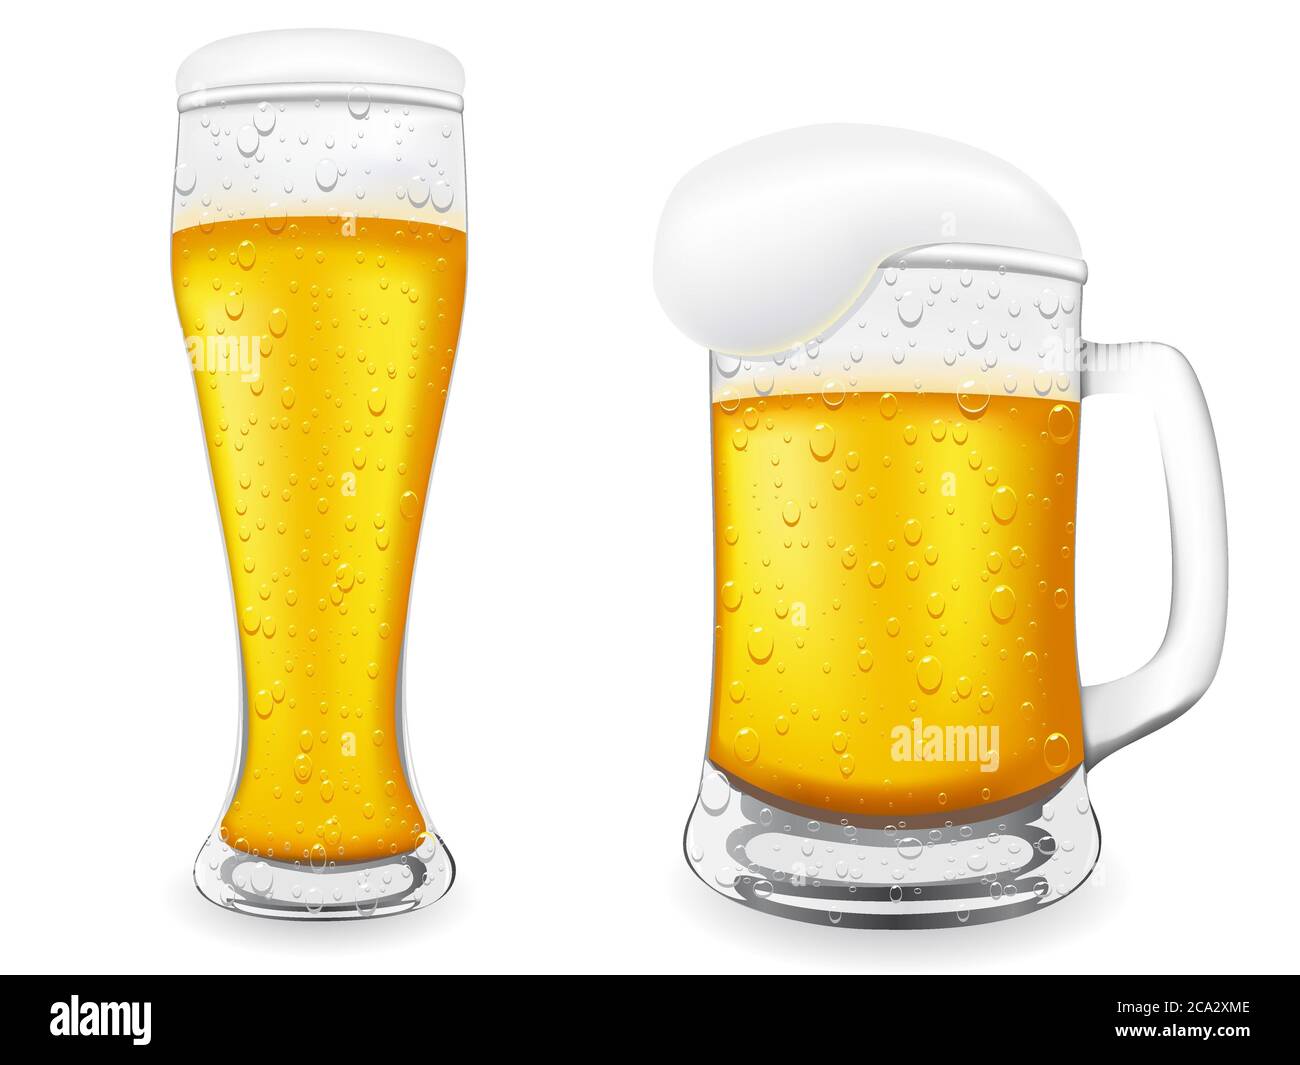 37,100+ Beer Glass Stock Illustrations, Royalty-Free Vector